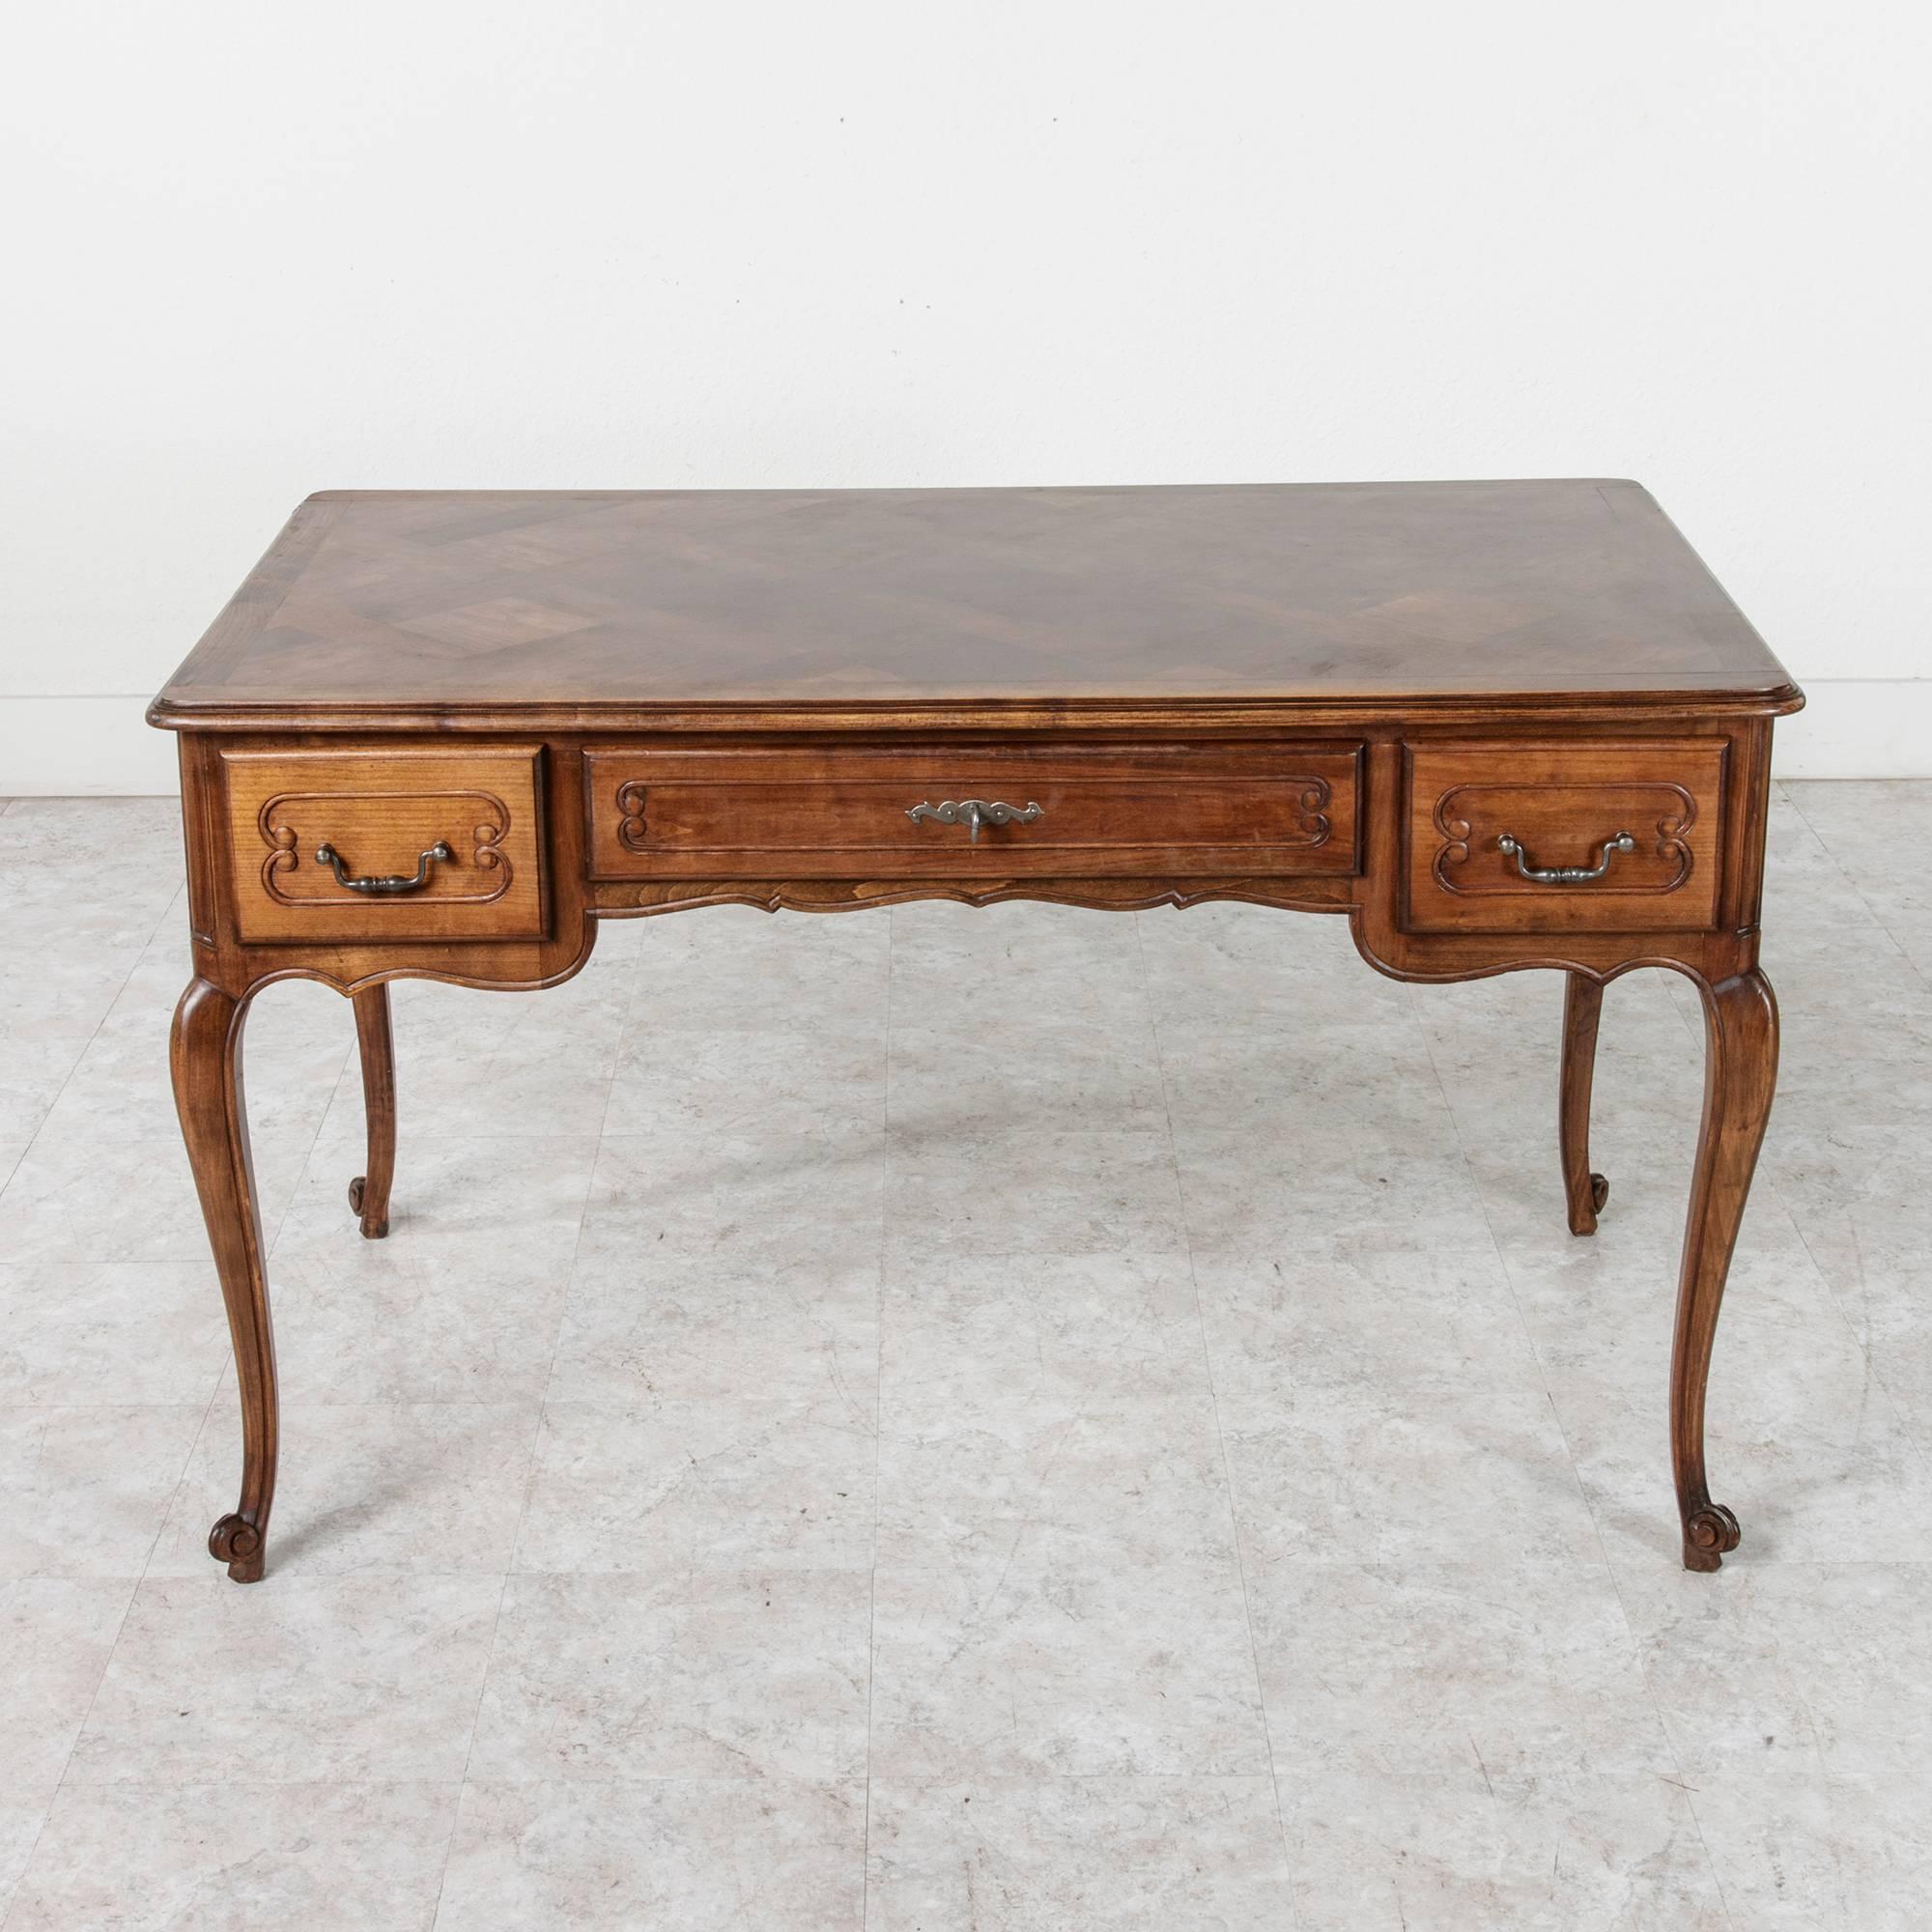 This elegant walnut Louis XV style desk features a parquet top and three drawers. Double faced with carved recessed panels on all sides, it stands on tapered cabriole legs that lead to Classic escargot feet. This elegant desk marries form and